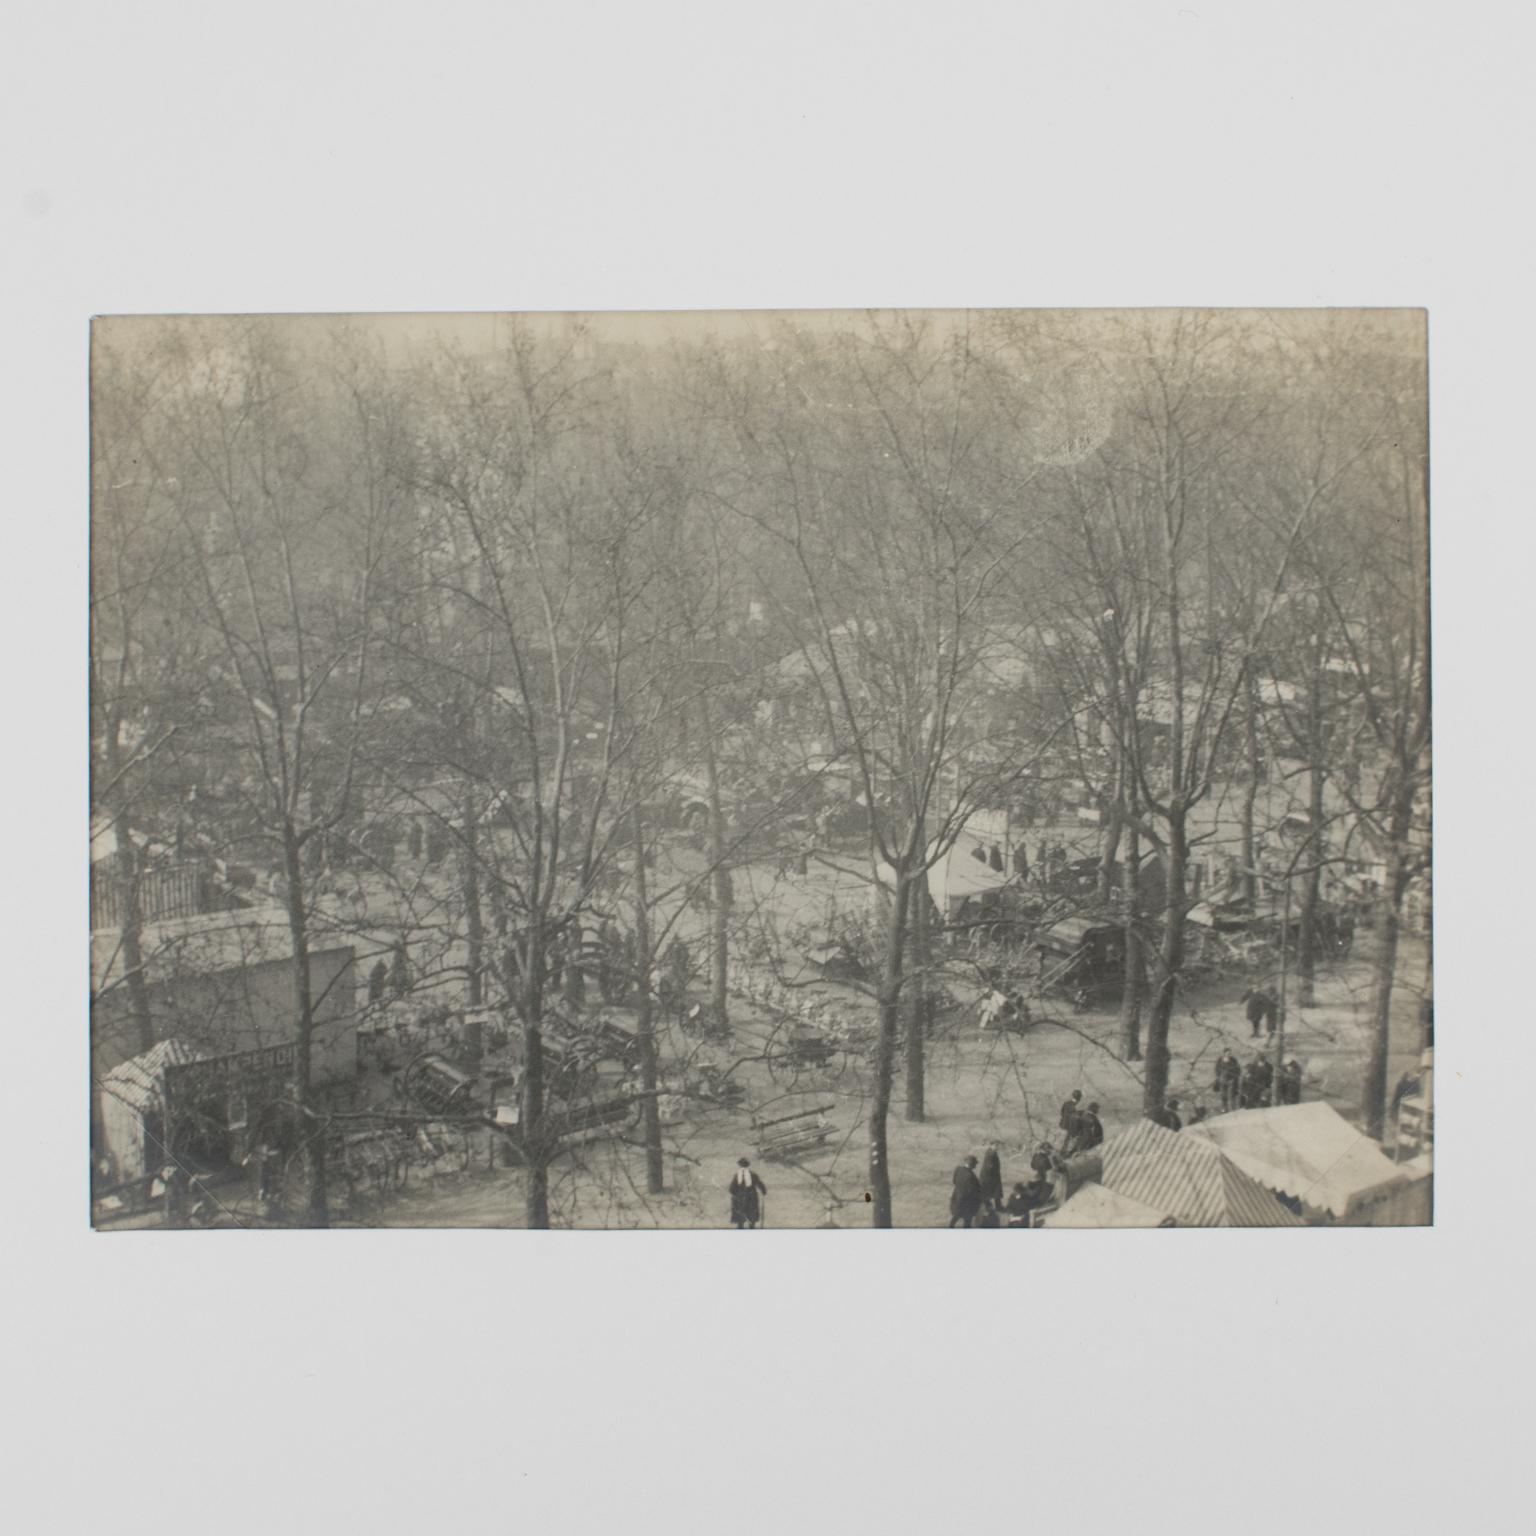 View of 1927 Autumn Fair in Lyon, Silver Gelatin Black and White Photography - Gray Landscape Photograph by Unknown